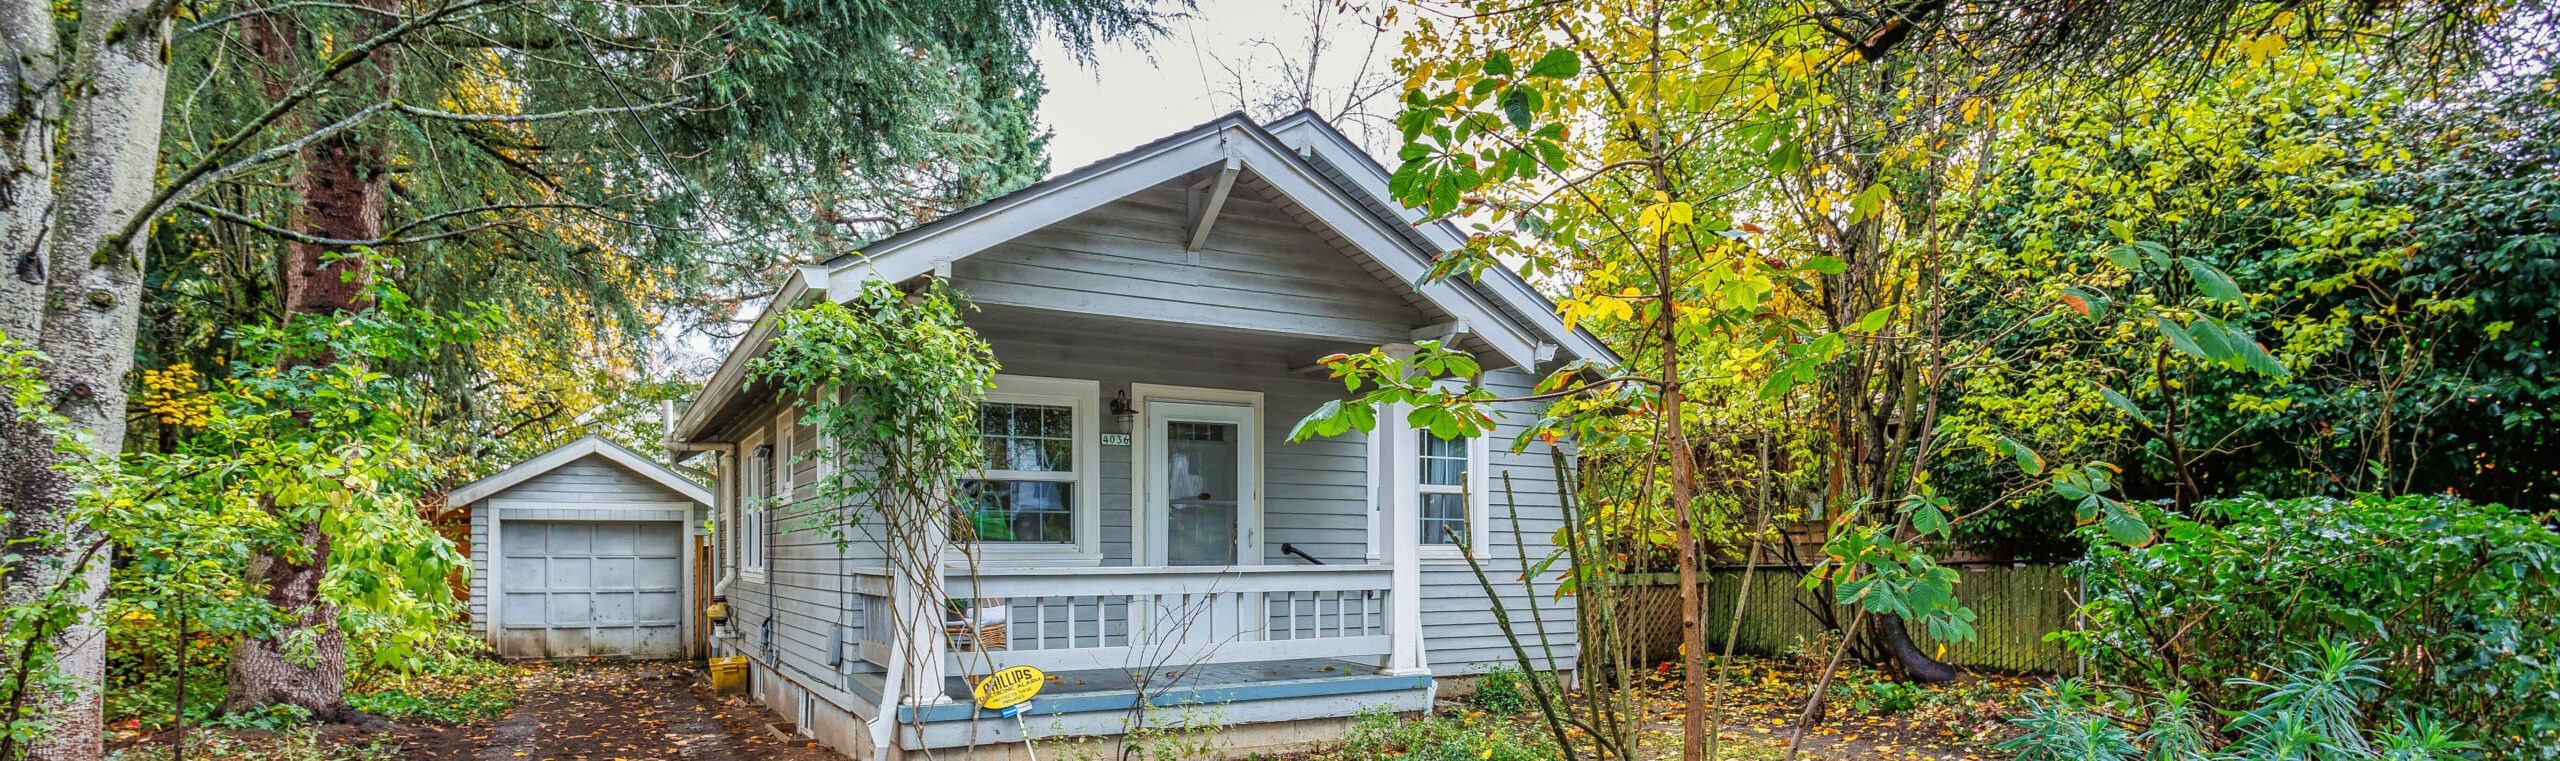 Just Listed! BEGINNER’S BROOKLYN BUNGALOW